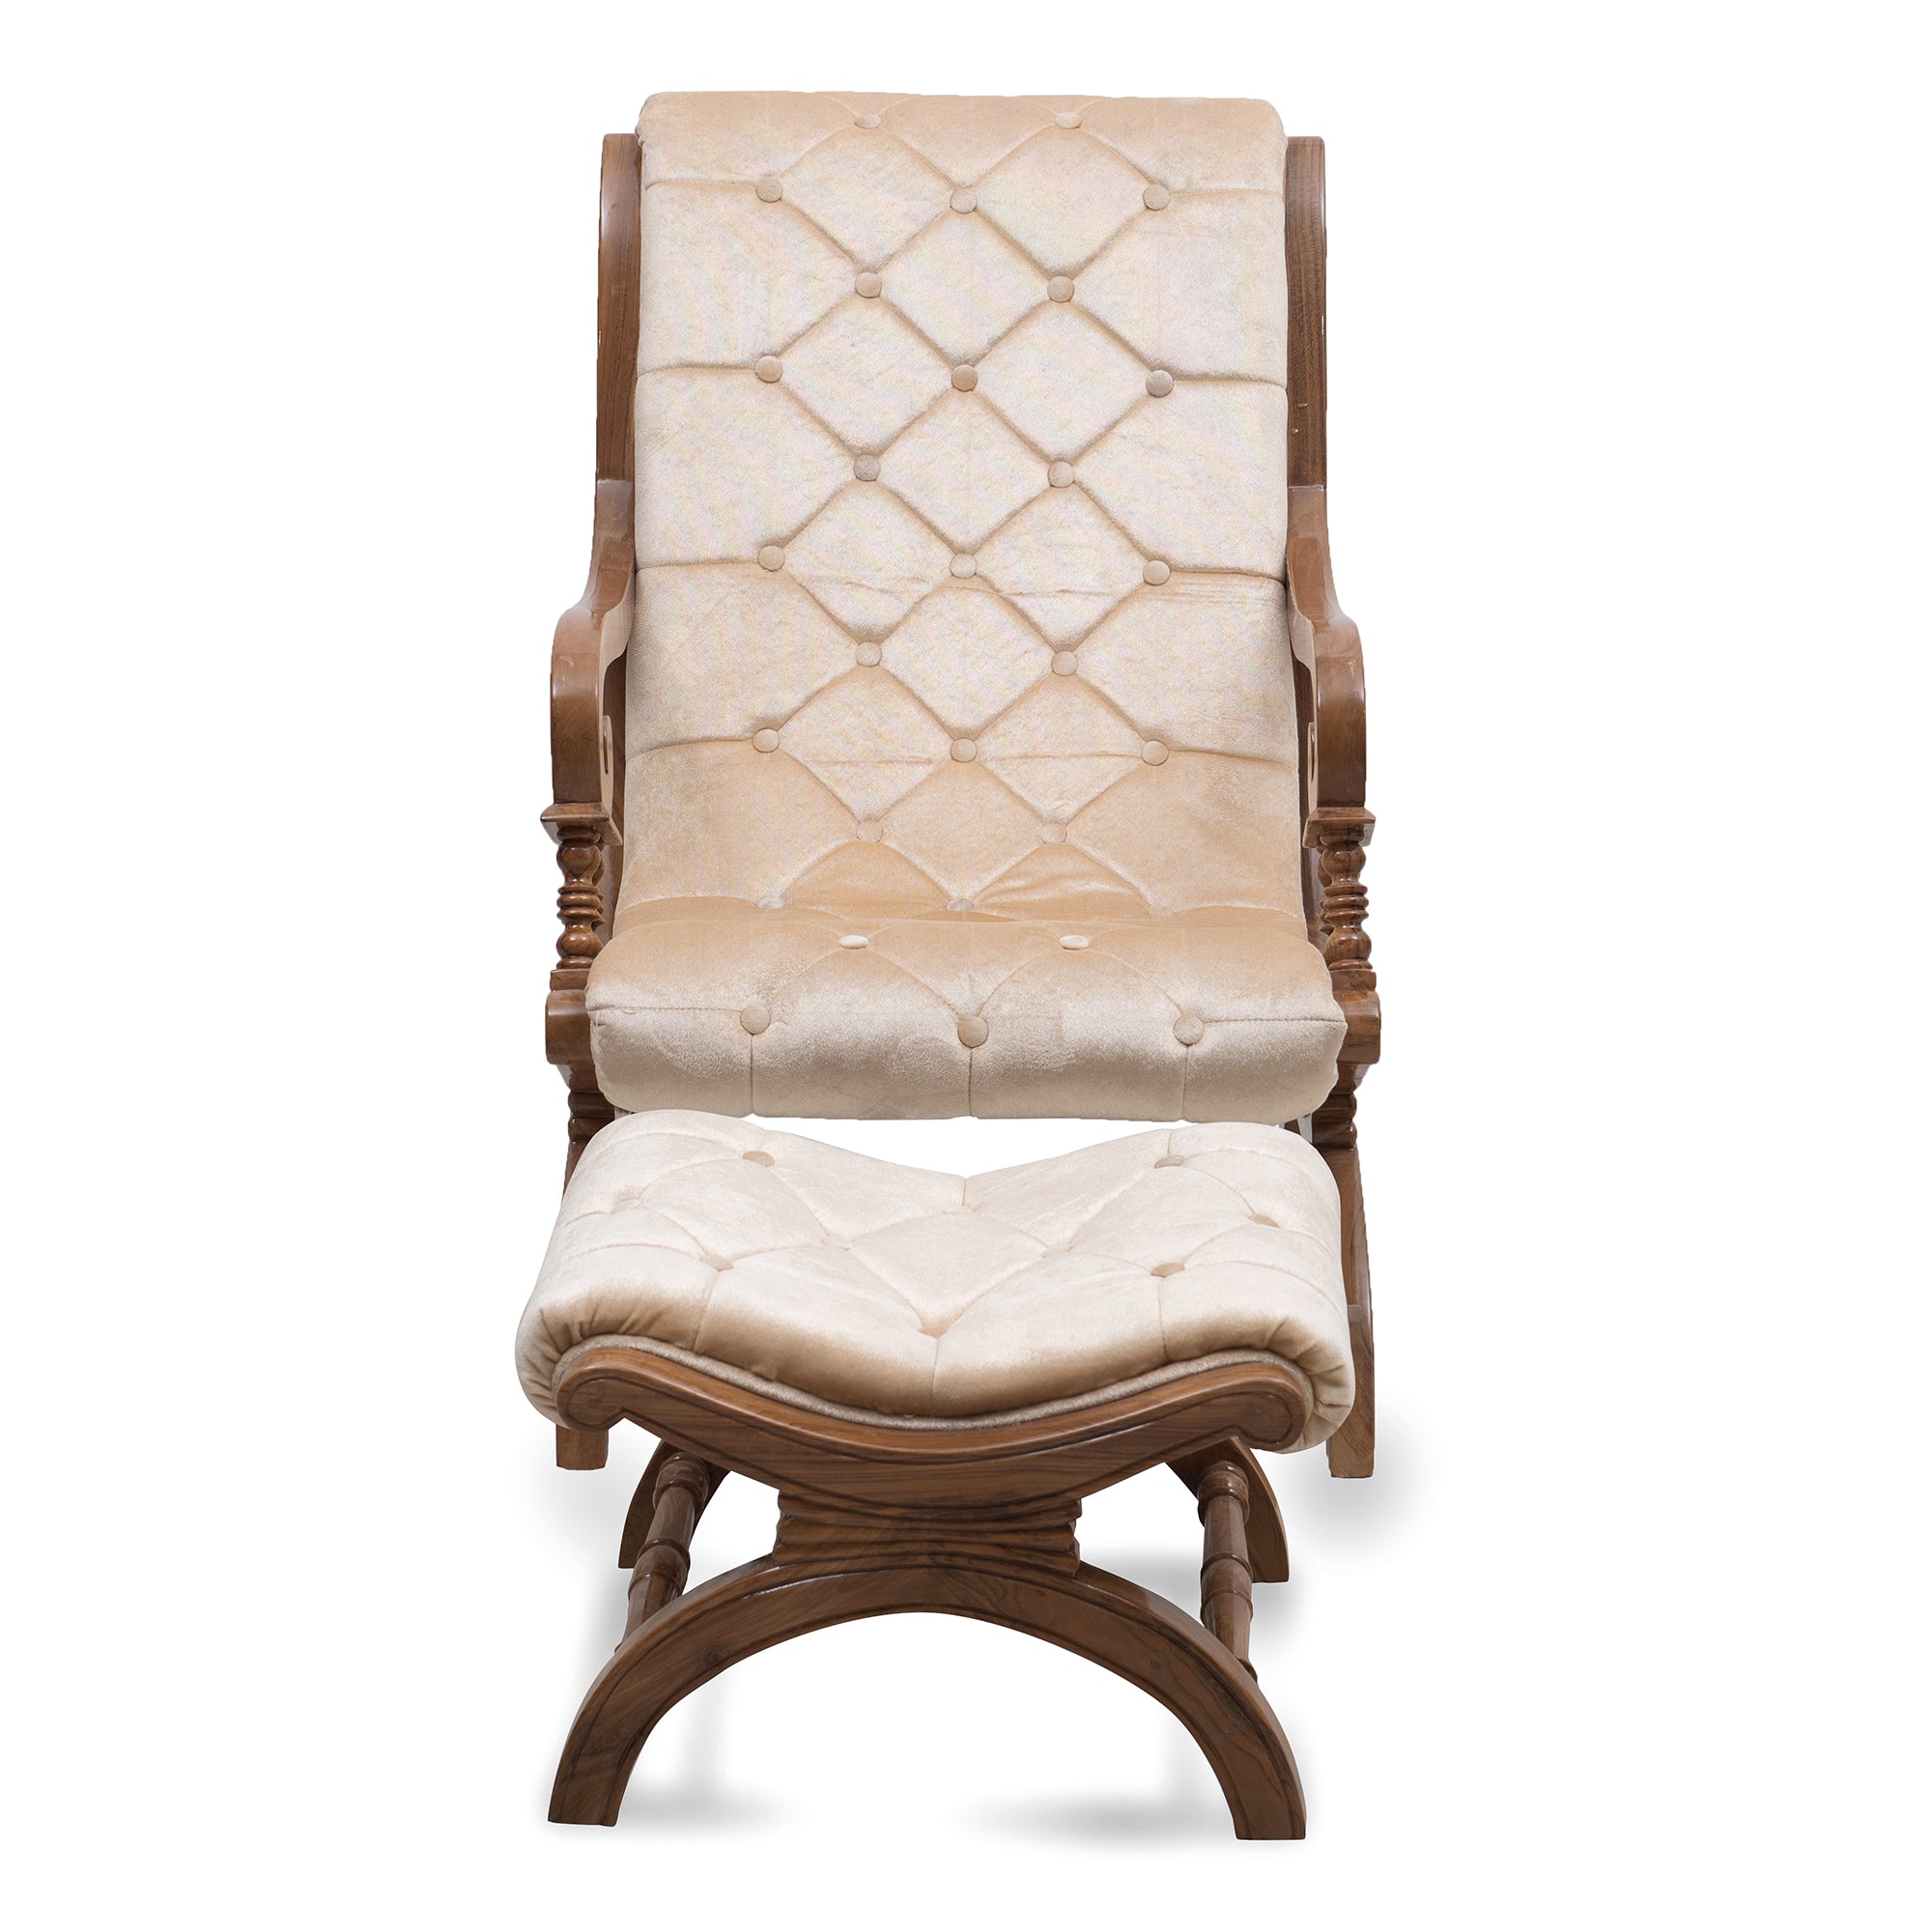 Butros Fabric Upholstered Aaram Chair with FootRest (Brown Silver)